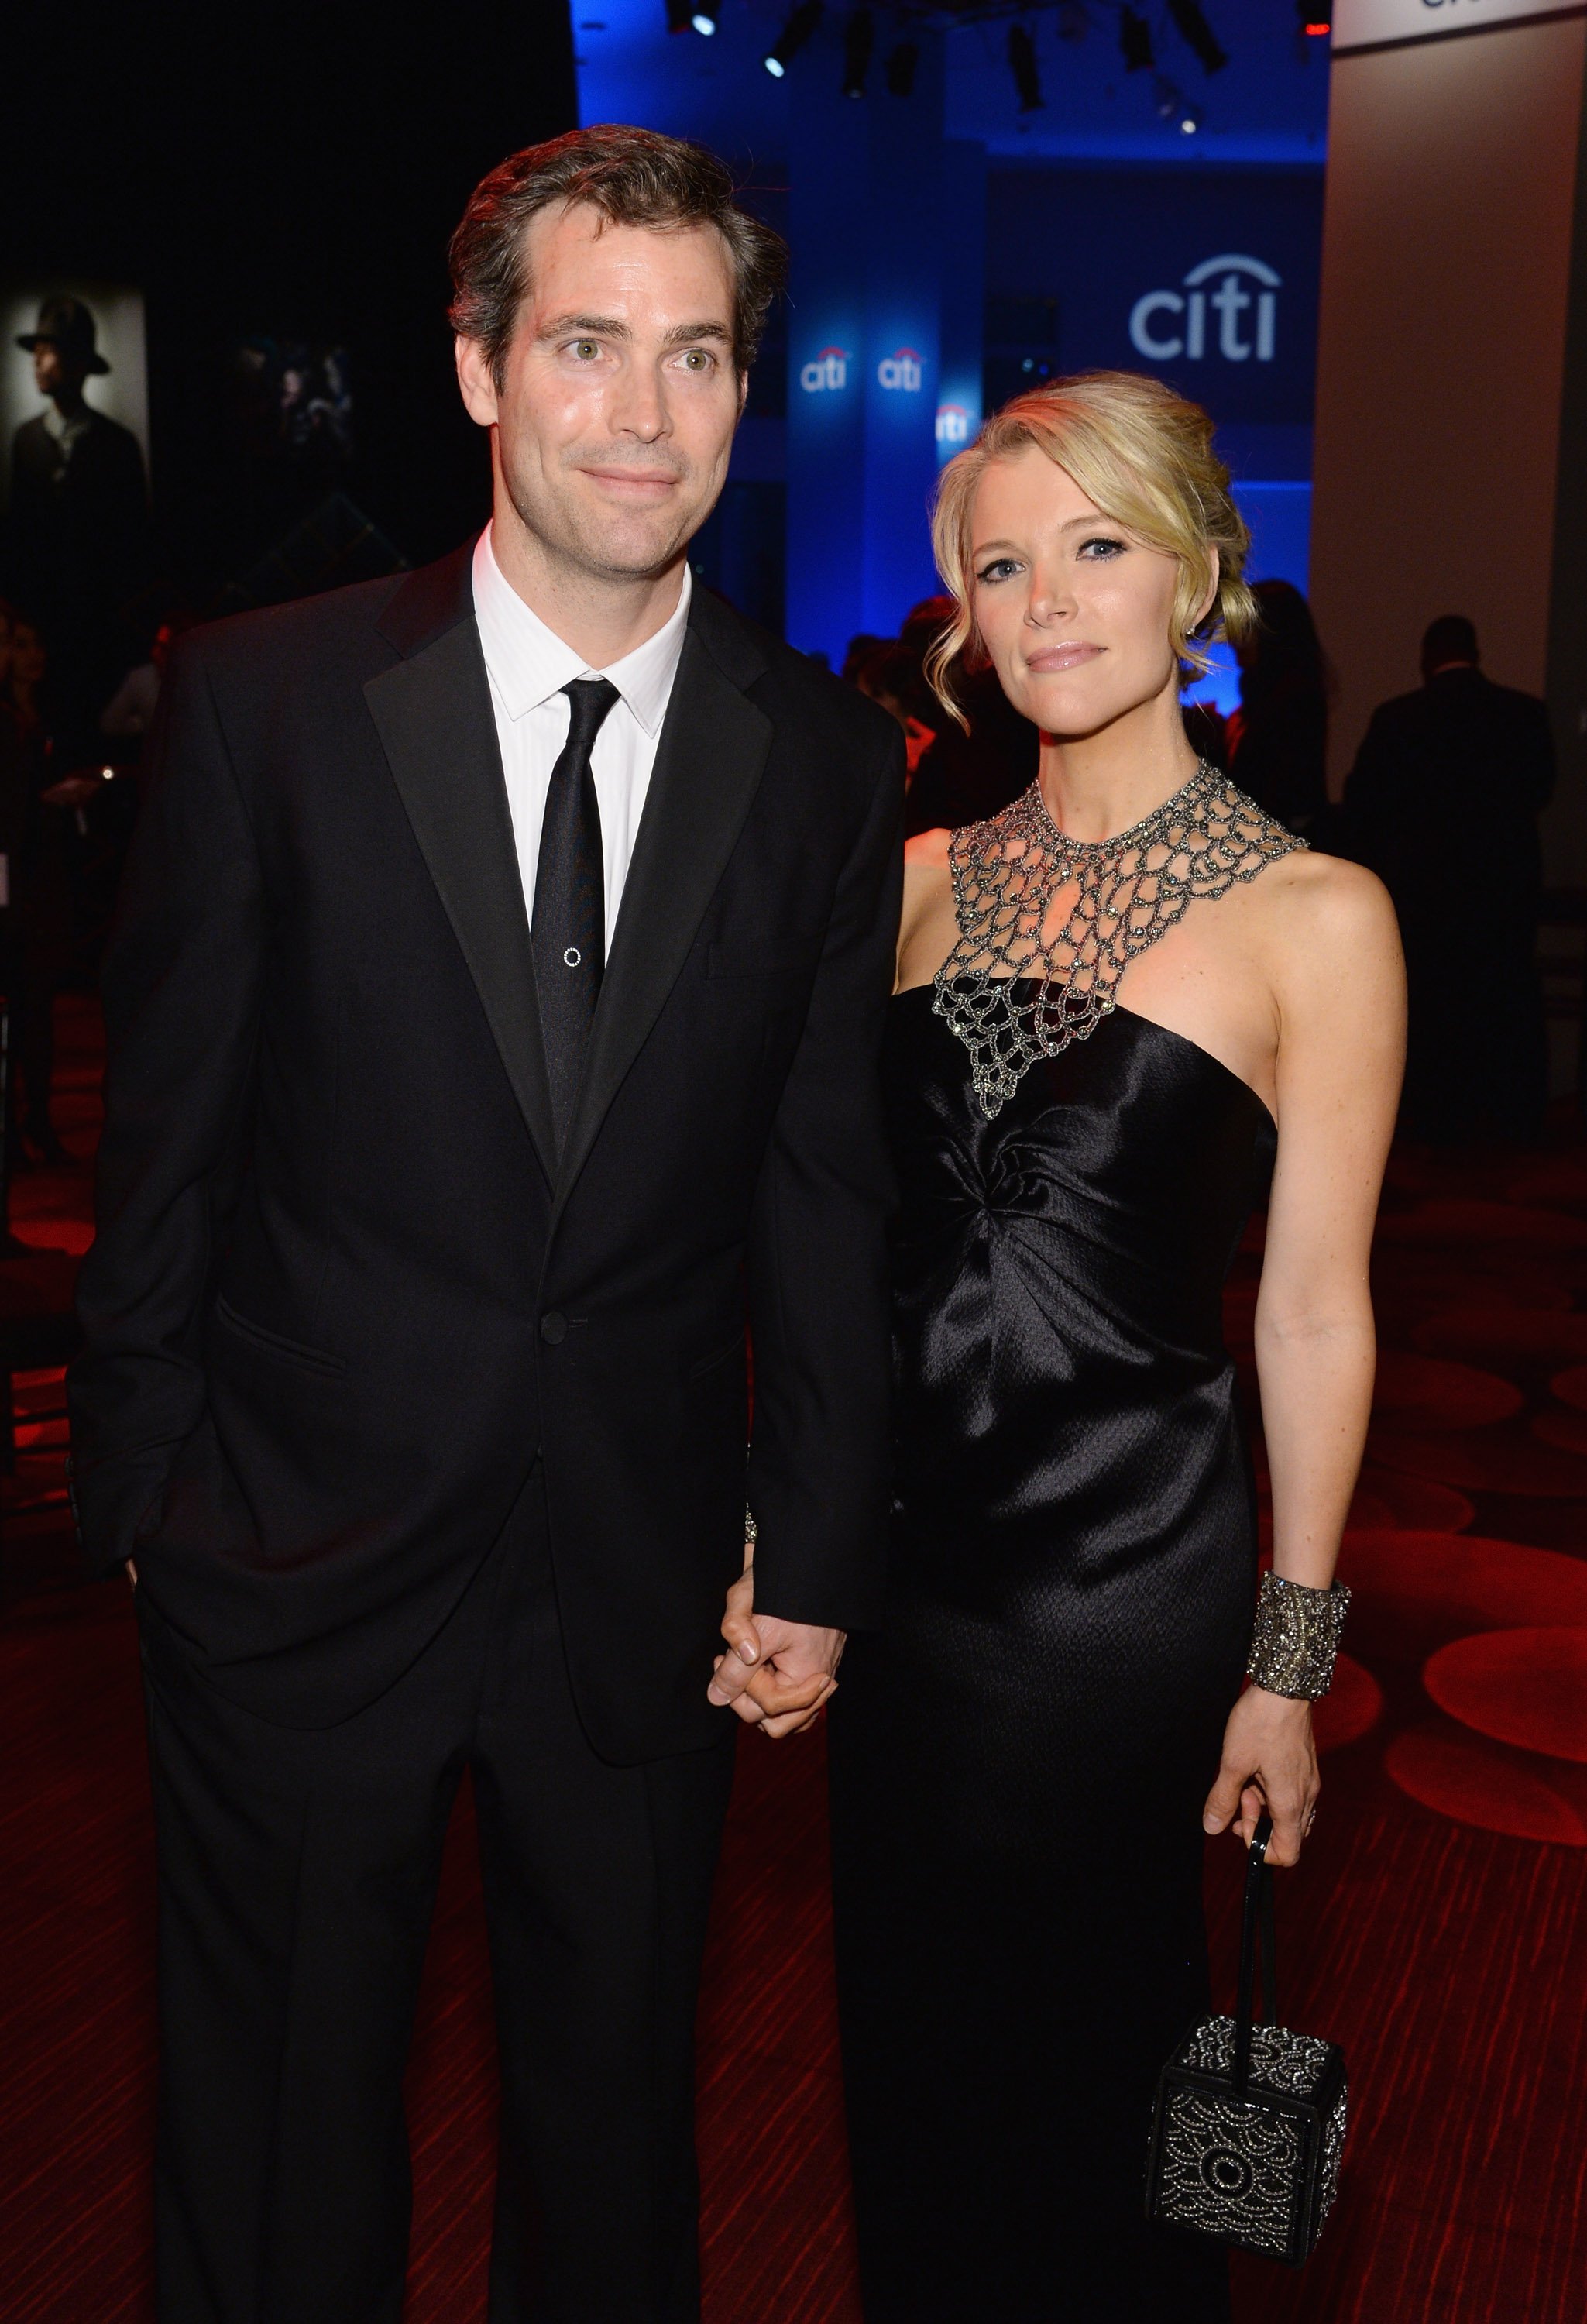 Douglas Brunt (L) and Honoree Megyn Kelly attend the TIME 100 Gala, TIME's 100 most influential people in the world, at Jazz at Lincoln Center on April 29, 2014, in New York City. | Source: Getty Images.